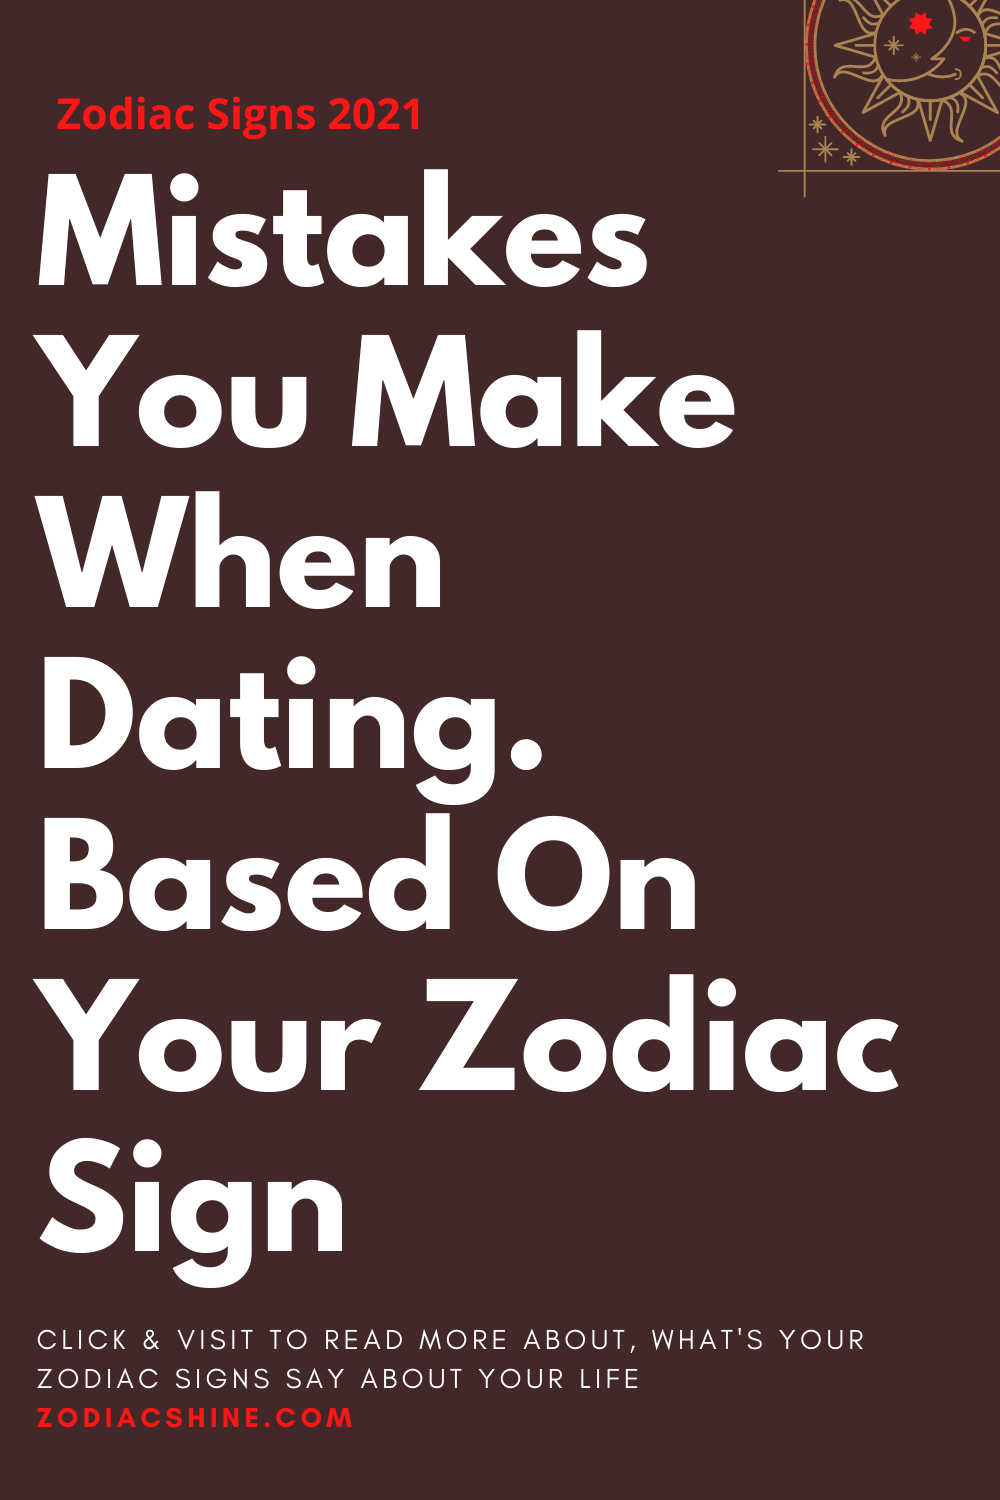 Mistakes You Make When Dating. Based On Your Zodiac Sign